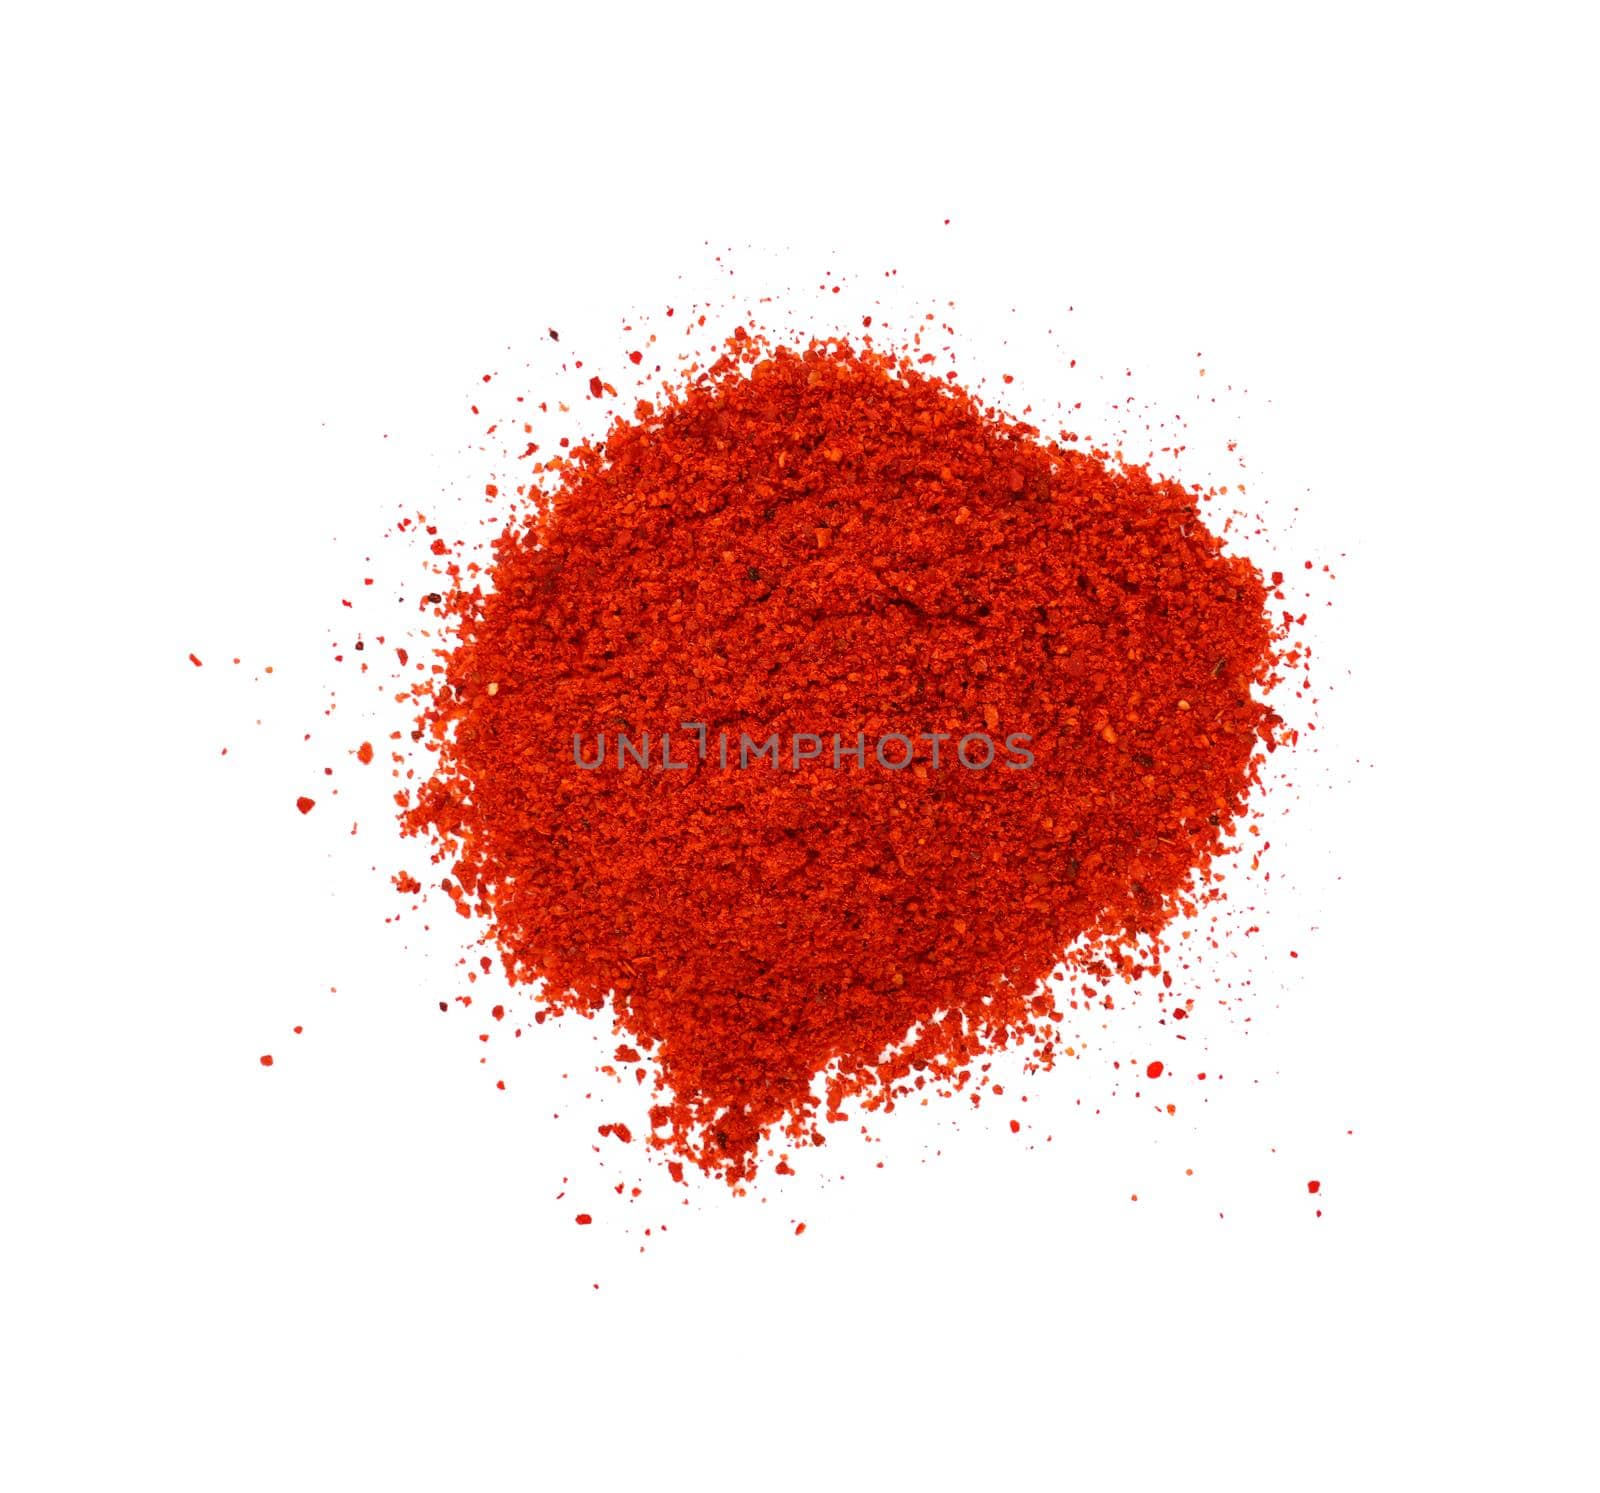 Close up one heap of red chili pepper, paprika or sundried tomato powder spilled and spread around isolated on white background, elevated top view, directly above